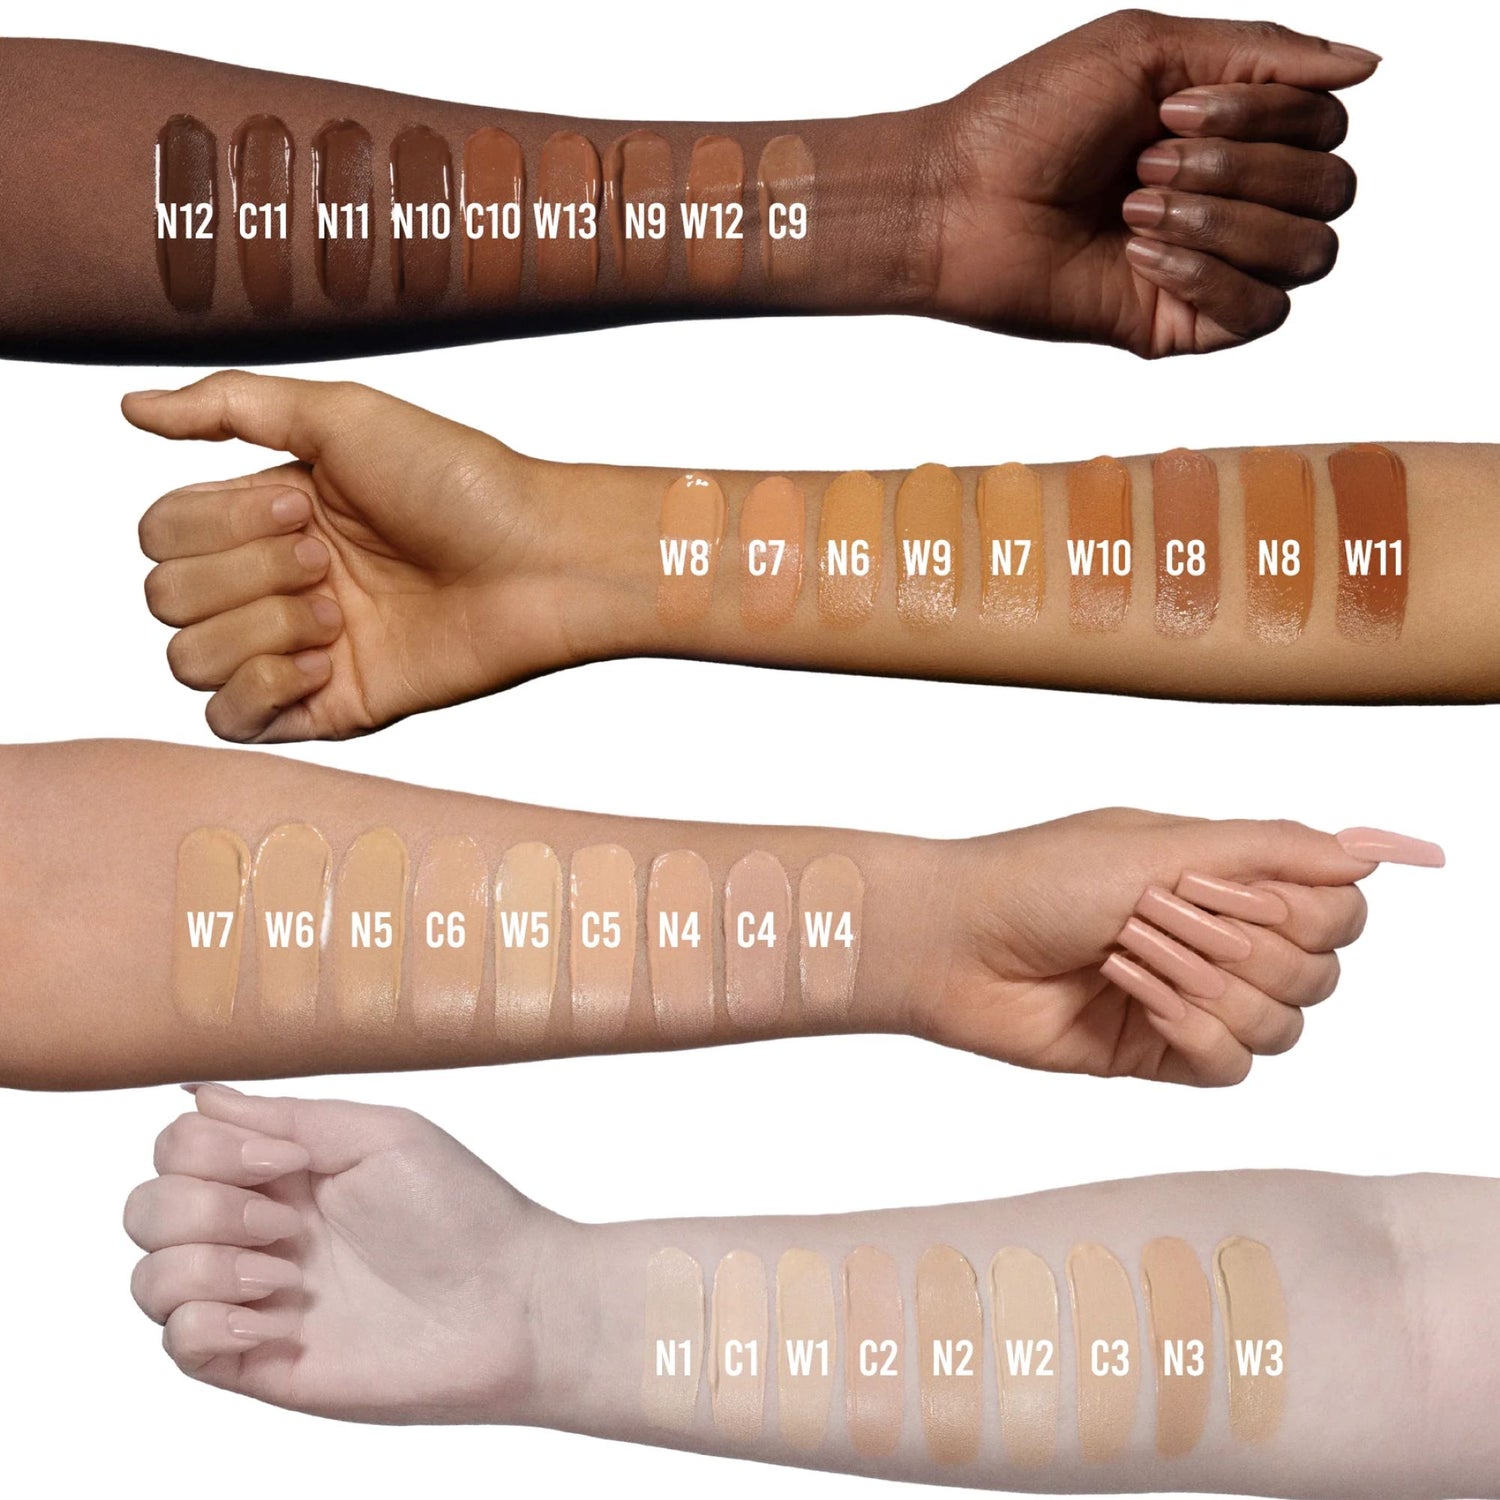 Bperfect Chroma Cover Foundation Luminous Swatches